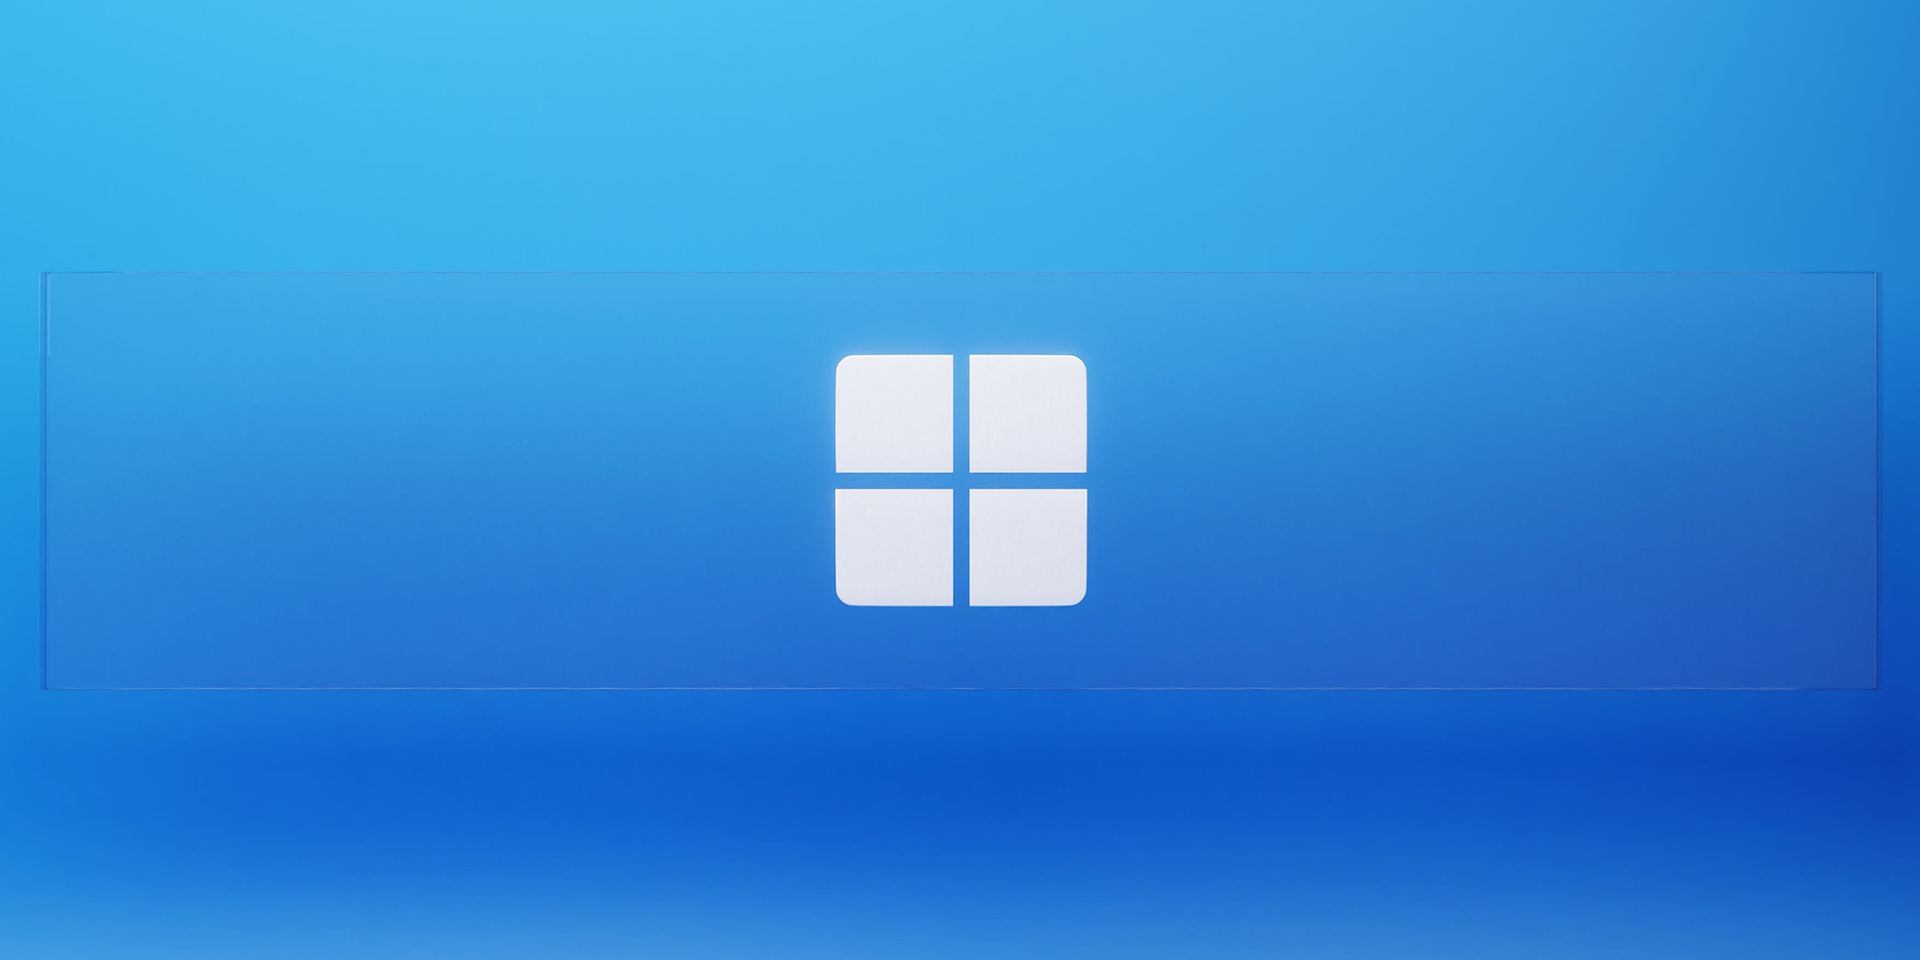 The Microsoft logo on a blue background.